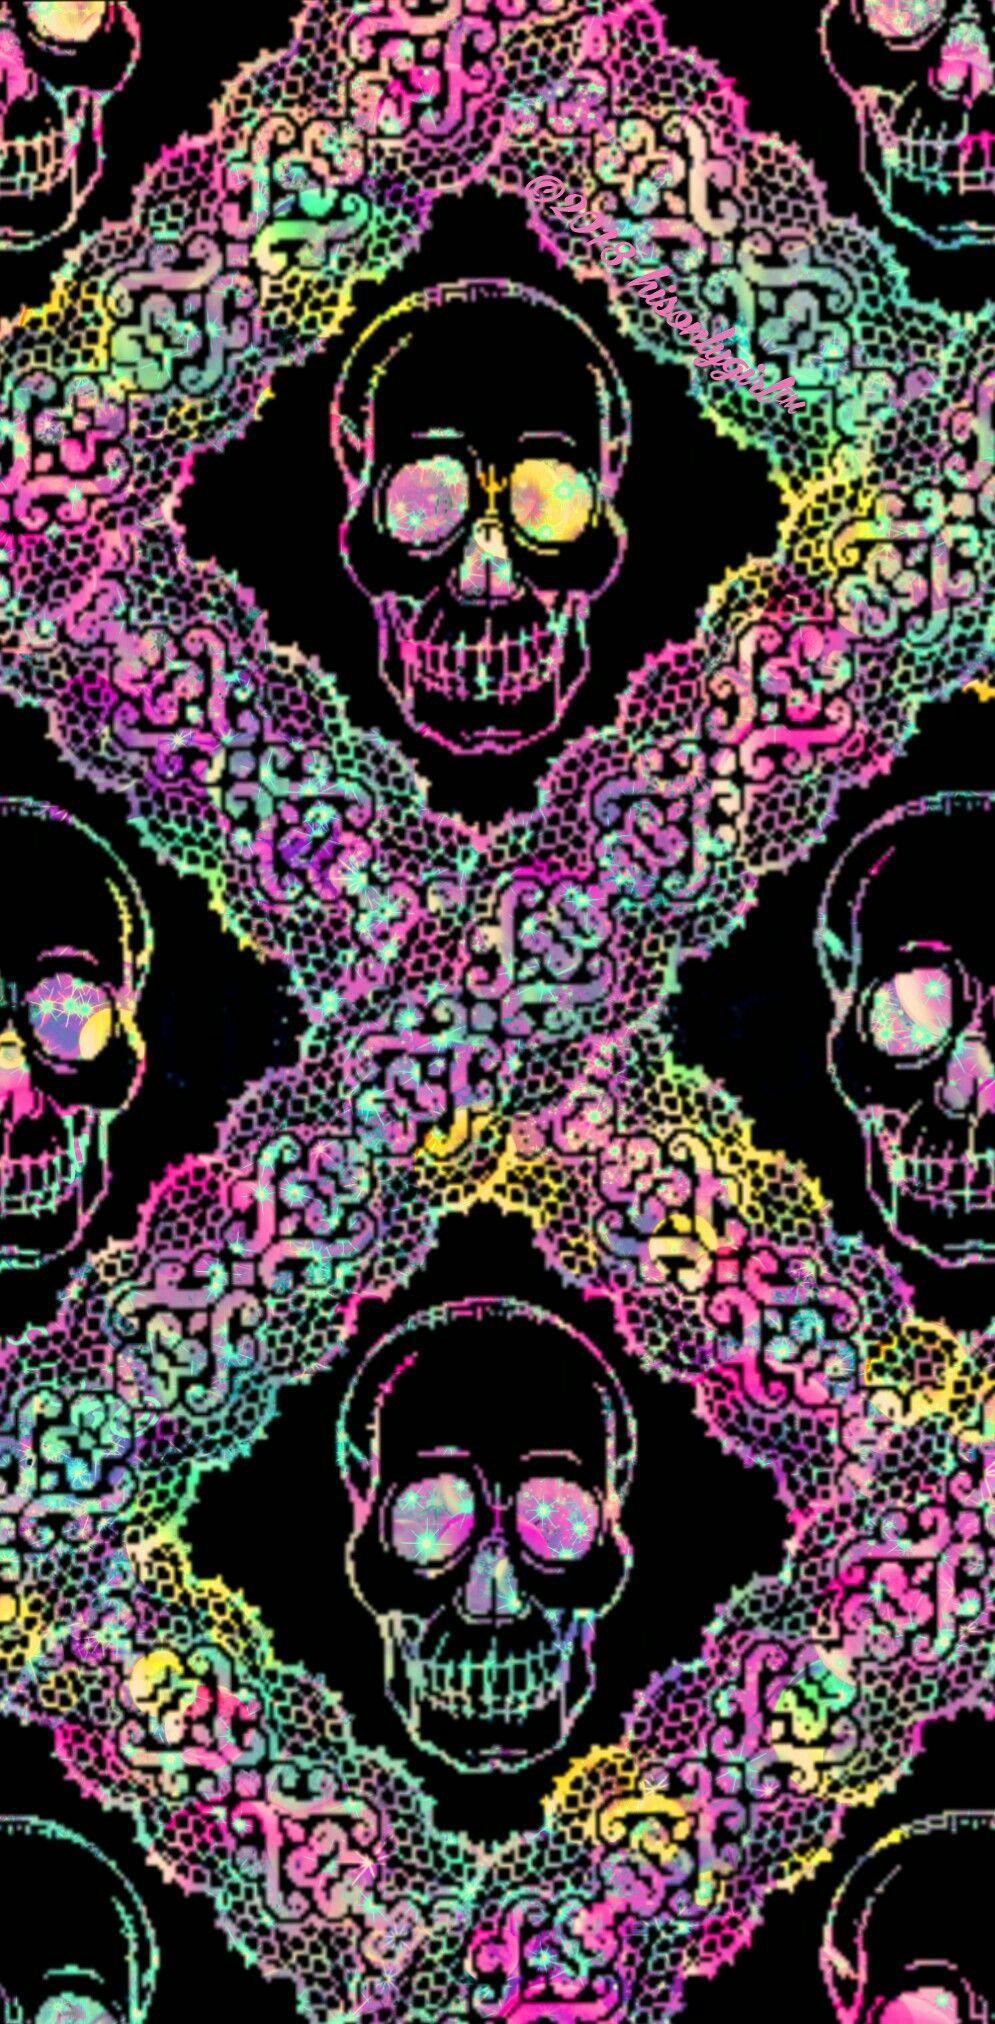 Colorful lace skulls galaxy iPhone /Android wallpaper I created